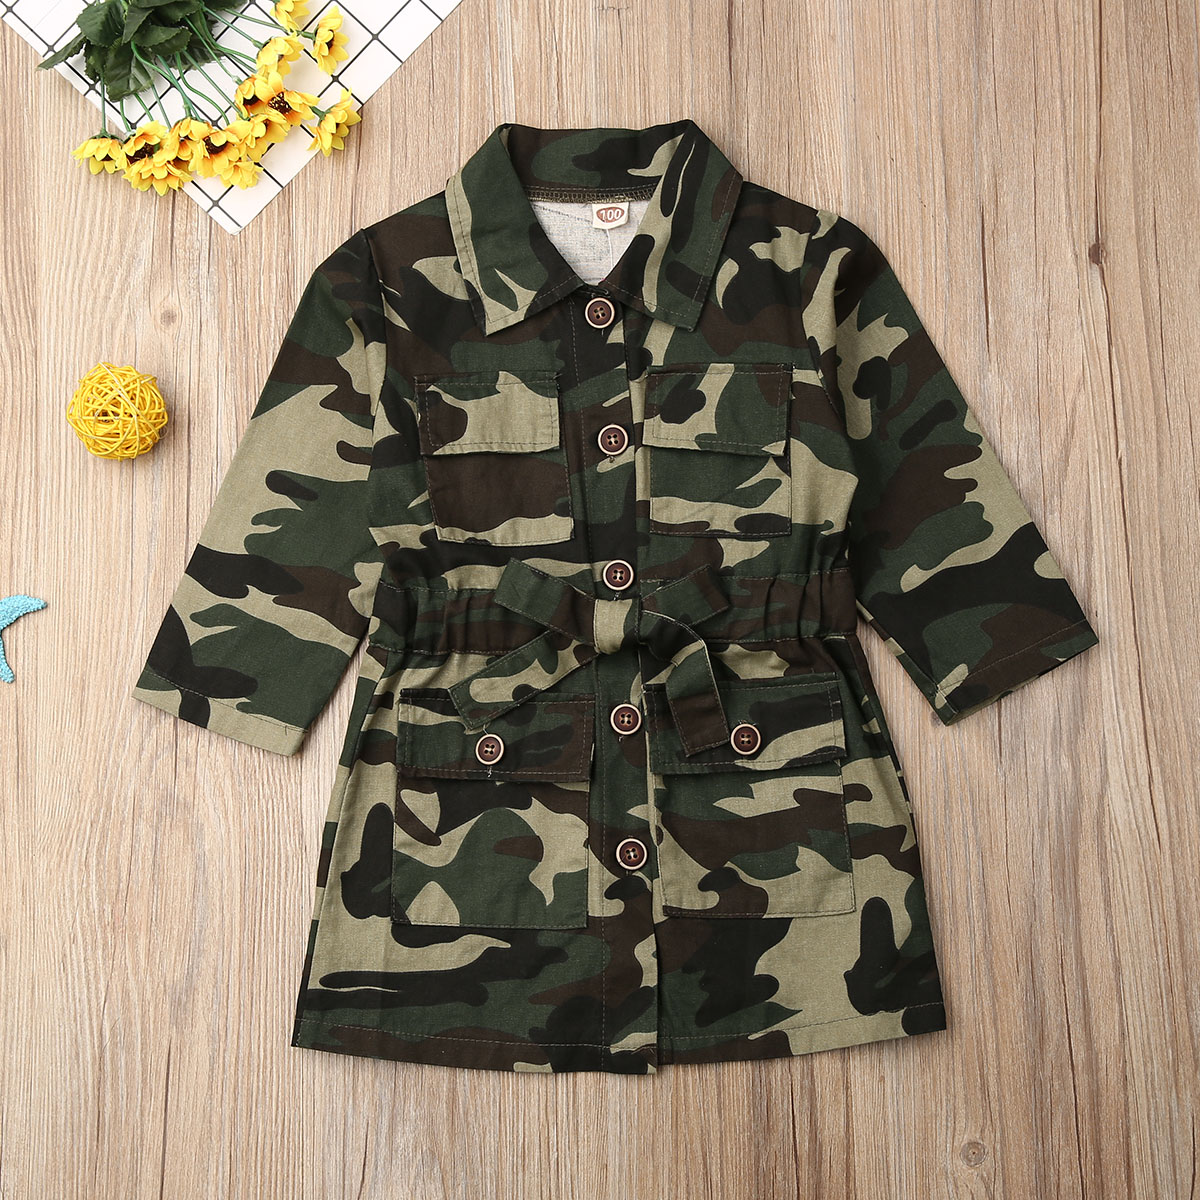 Fashion New Autumn Winter Kids Baby Girls Jackets Camouflage Long Sleeve Trench Casual Toddler Children Girls Outwear Clothes